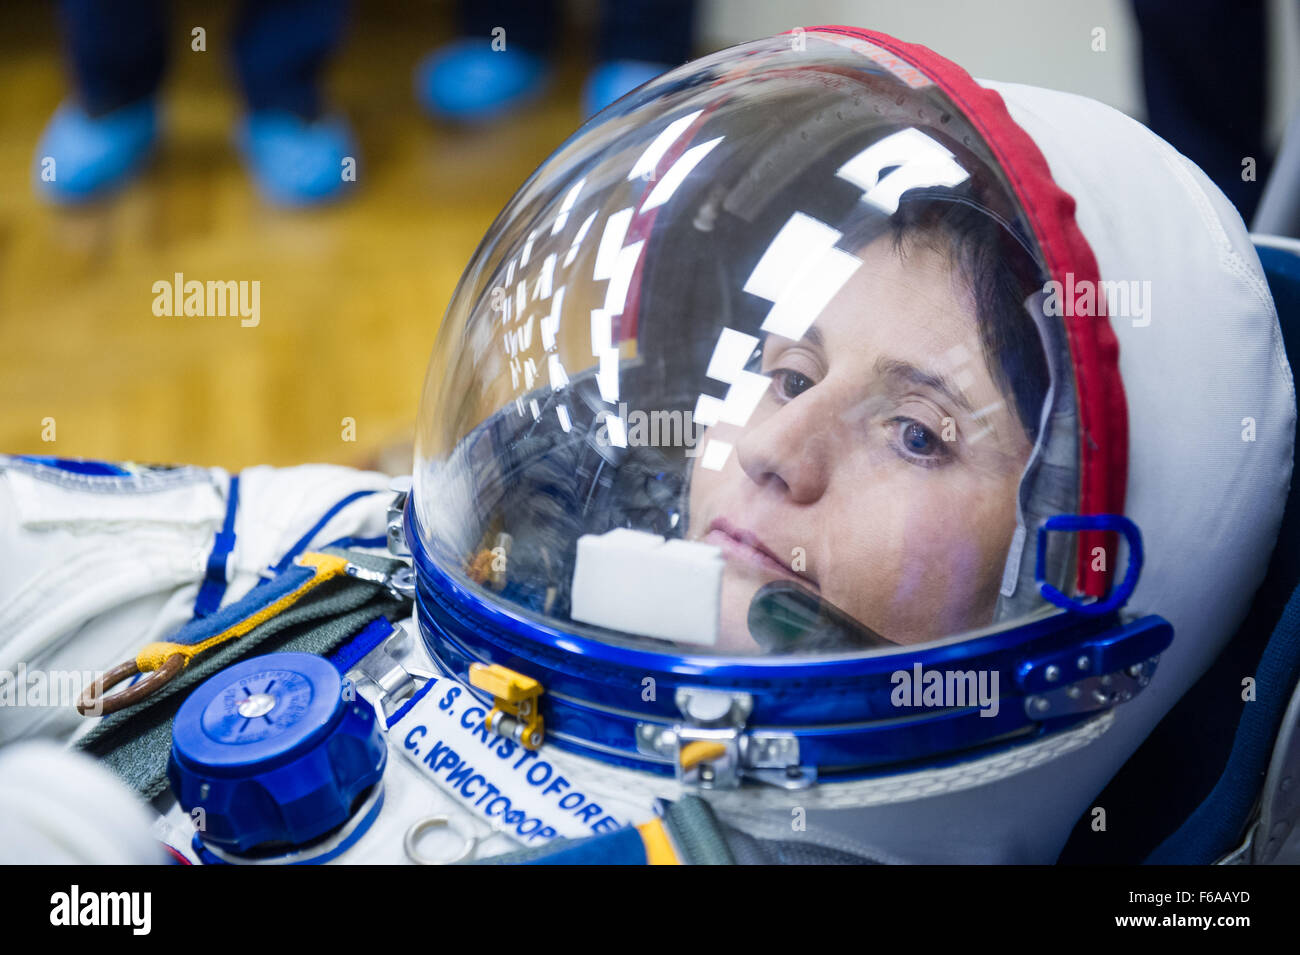 Expedition 42 Flight Engineer Samantha Cristoforetti of the European Space Agency (ESA) has her Russian Sokol suit pressure checked in preparation for her launch aboard the Soyuz TMA-15M spacecraft on Sunday, Nov. 23, 2014, at the Baikonur Cosmodrome in Baikonur, Kazakhstan. Launch of the Soyuz rocket is scheduled for the early hours of Nov. 24 and will carry Cristoforetti and fellow crewmates, Soyuz Commander Anton Shkaplerov of the Russian Federal Space Agency (Roscosmos), and Flight Engineer Terry Virts of NASA, into orbit to begin their five and a half month mission on the International Sp Stock Photo